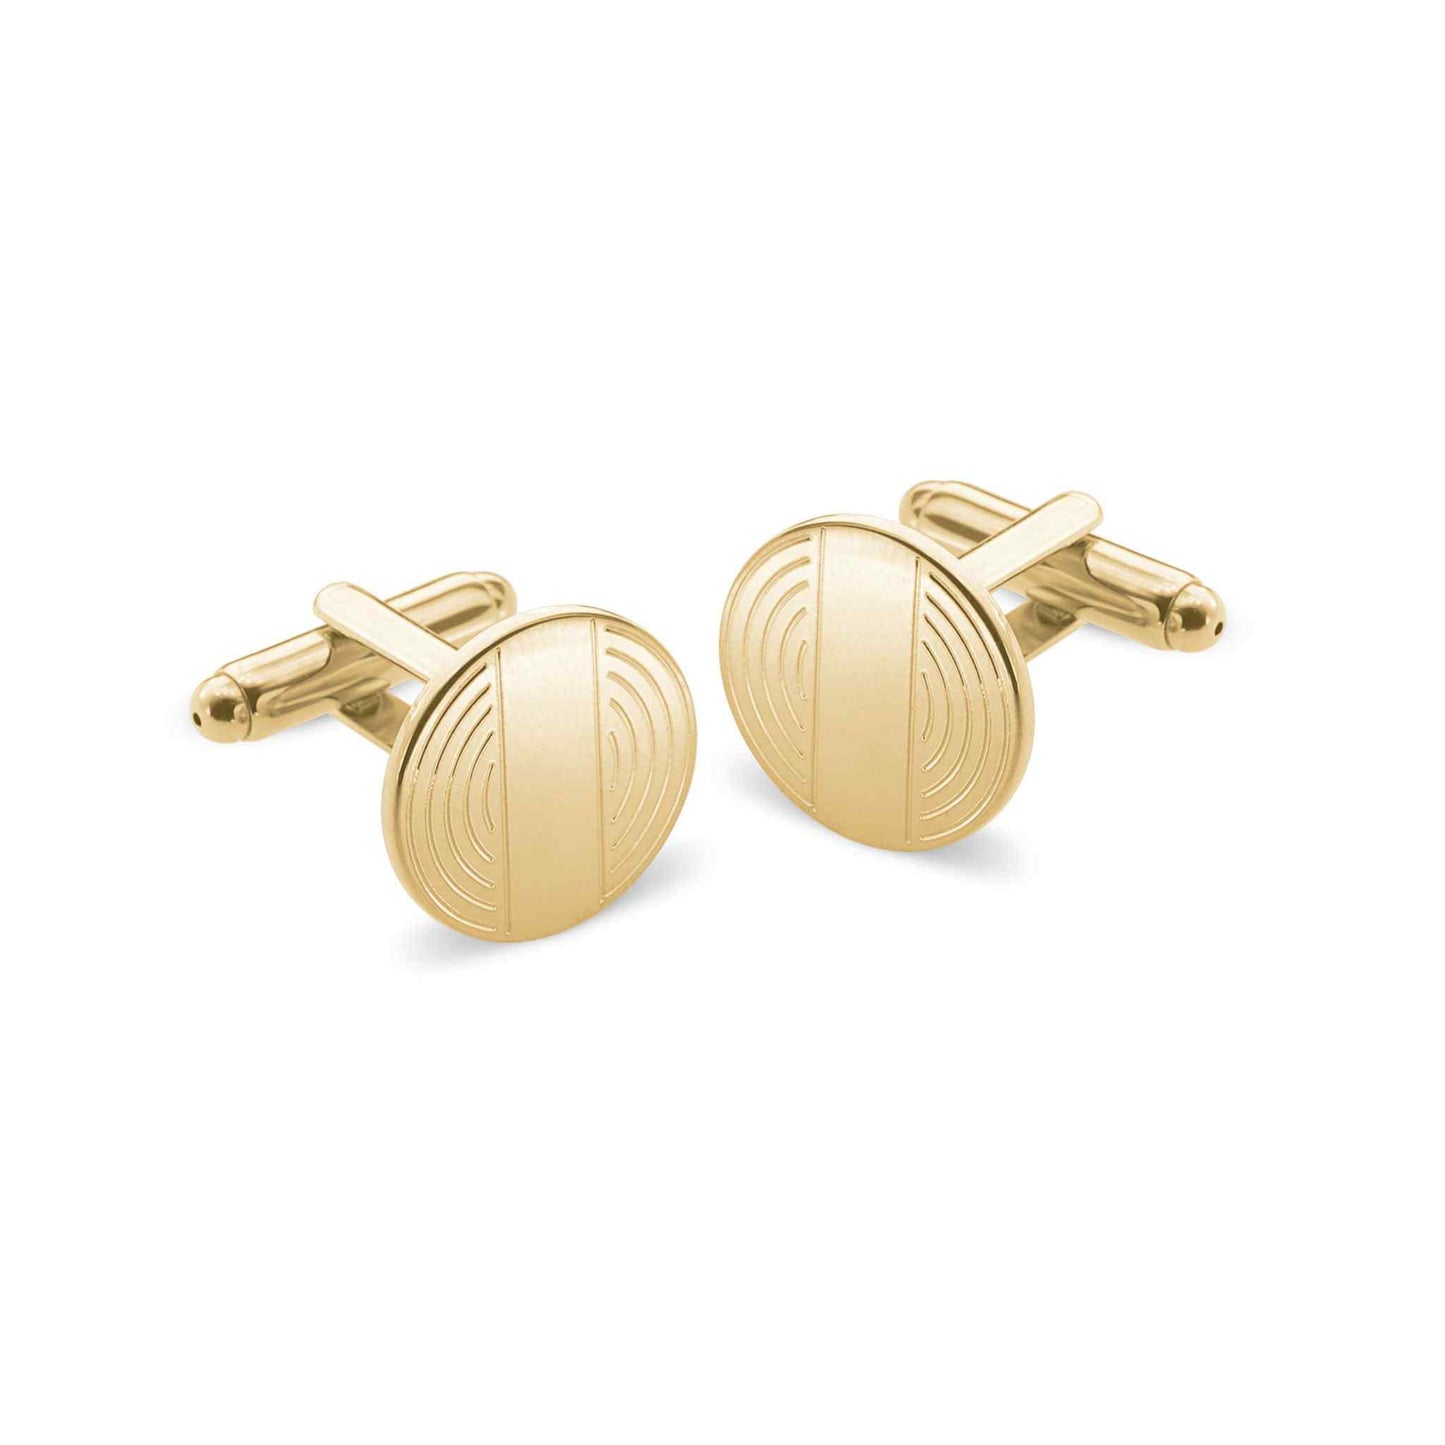 A round cufflinks with half ring engraving displayed on a neutral white background.